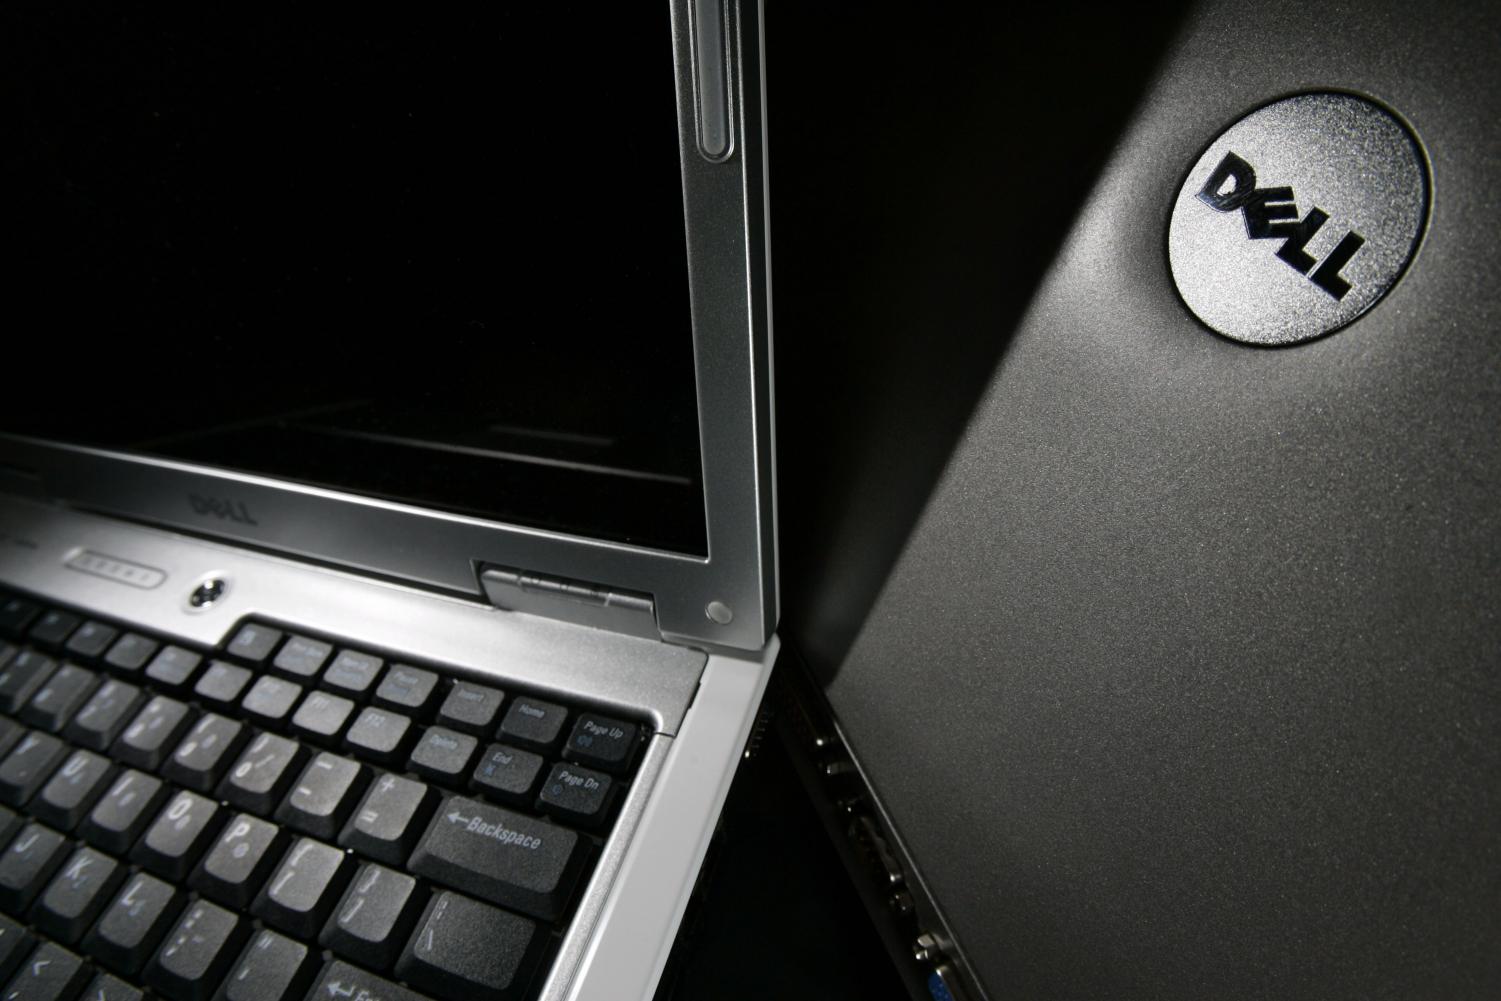 Dell laptops are seen in North Andover, Mass. in this March 1, 2007 file photo.